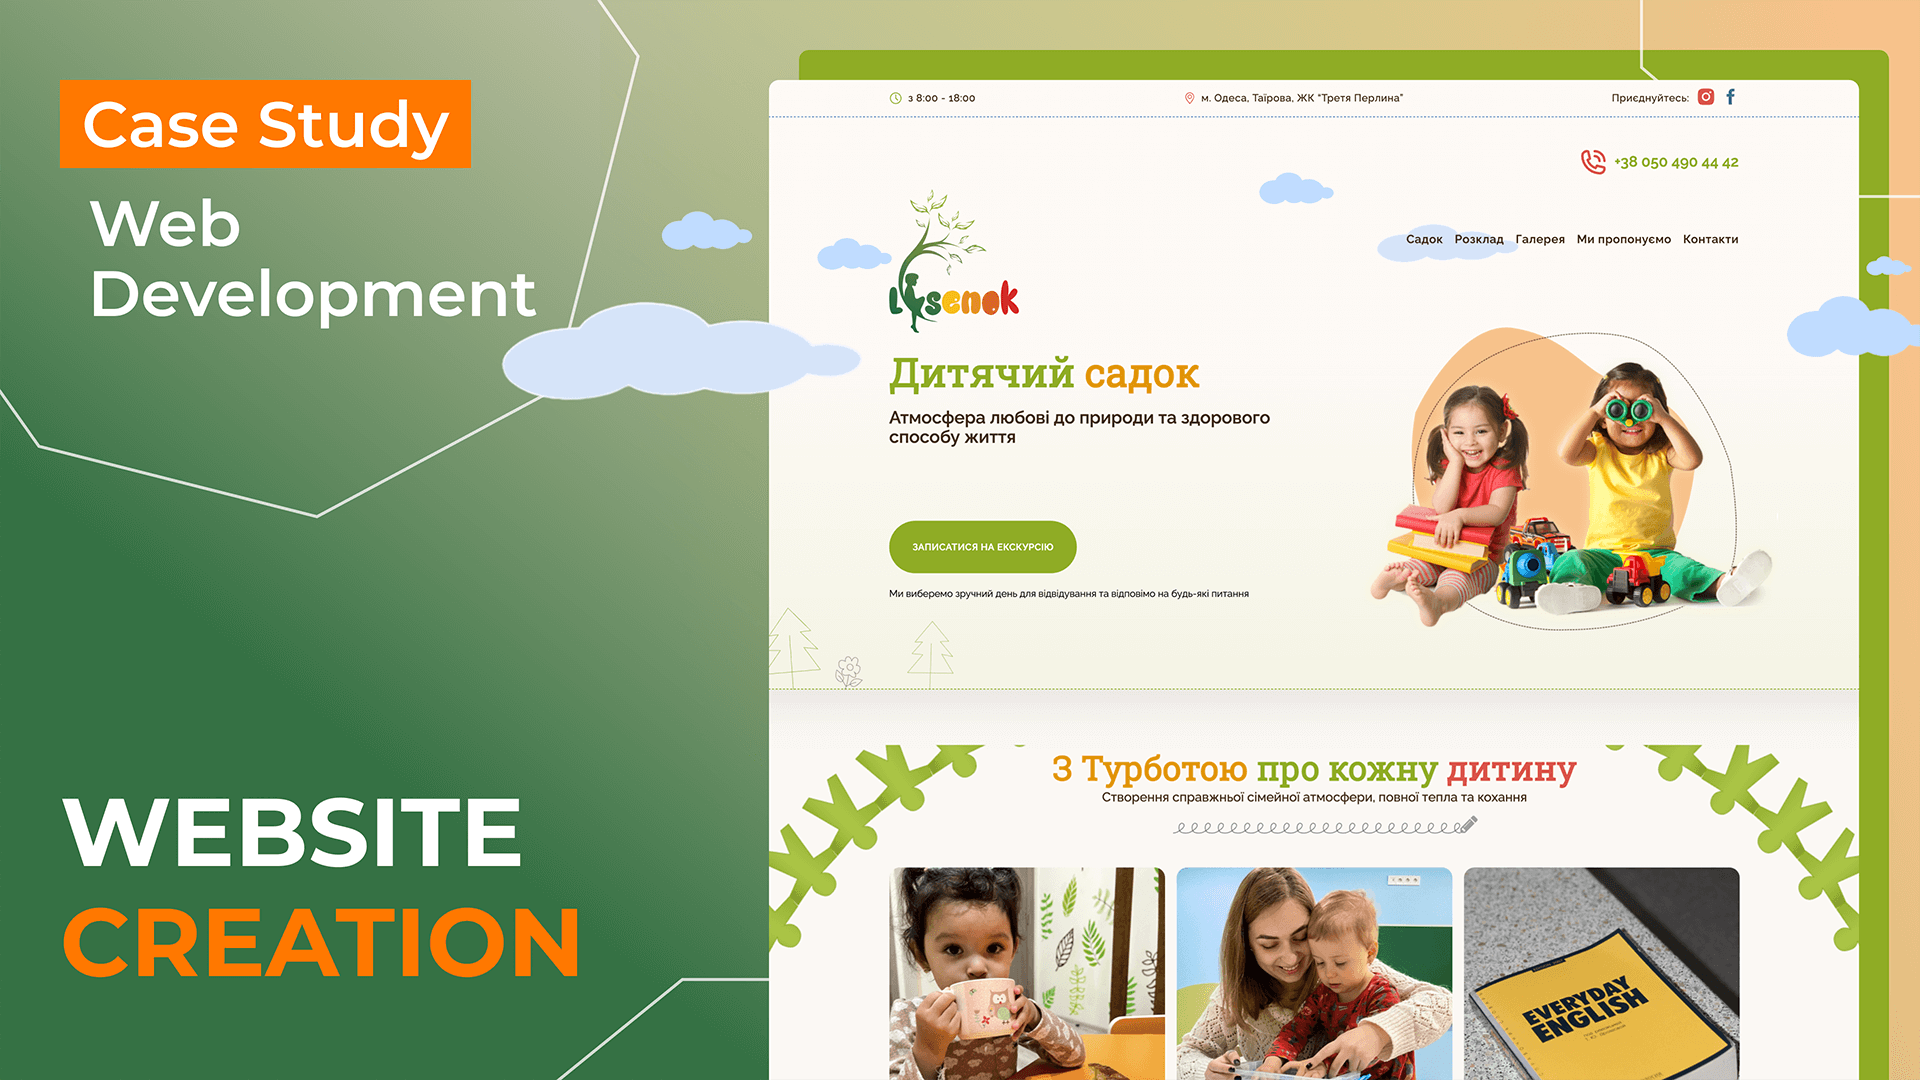 Case study on developing a landing page for the kindergarten “Lesenok”